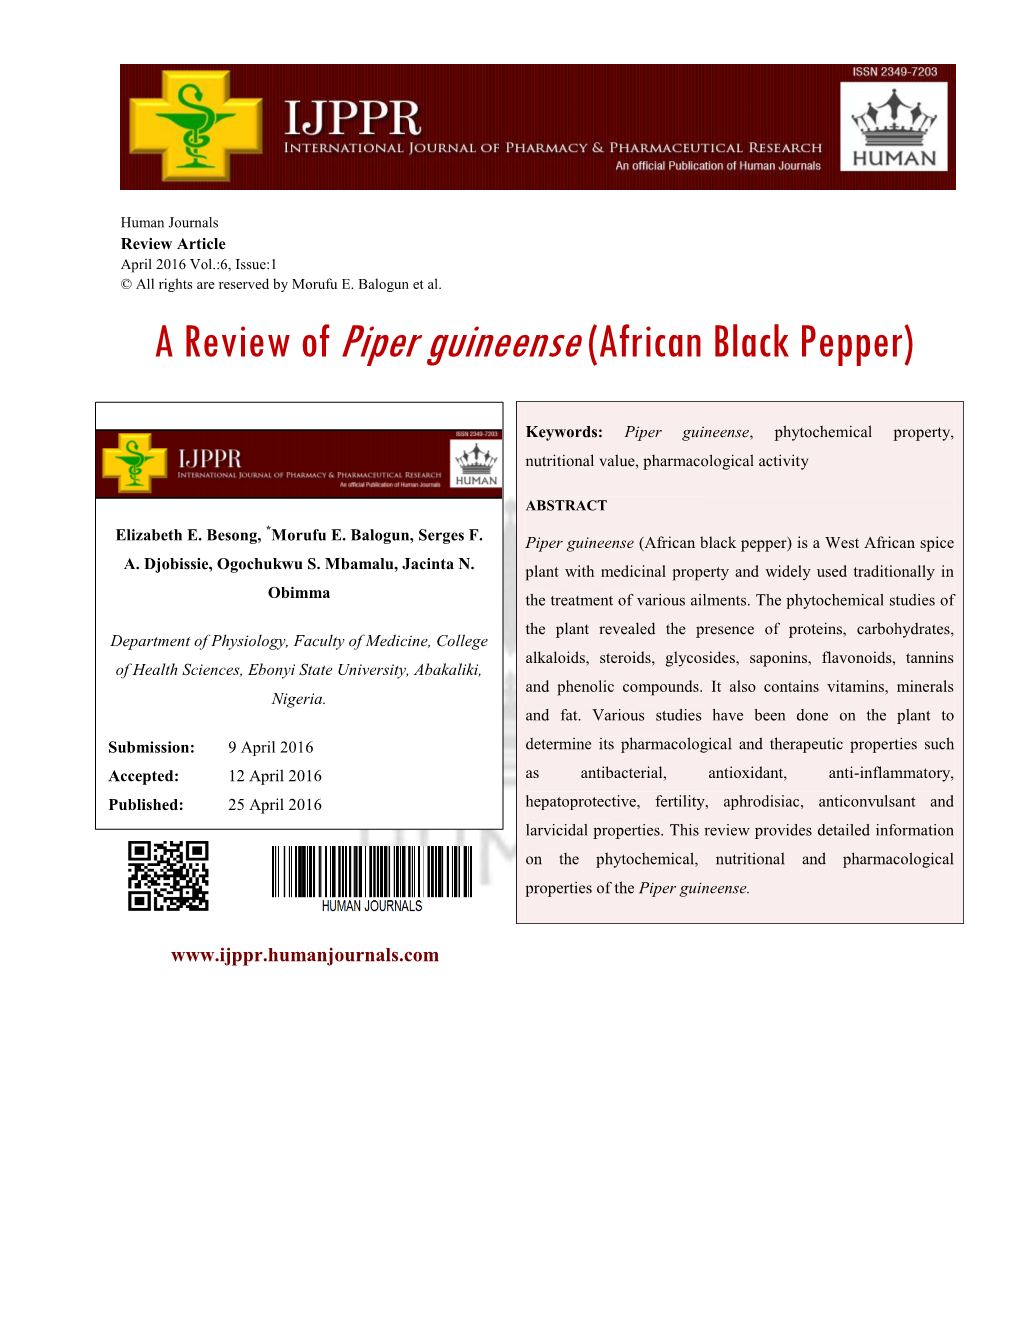 A Review of Piper Guineense(African Black Pepper)